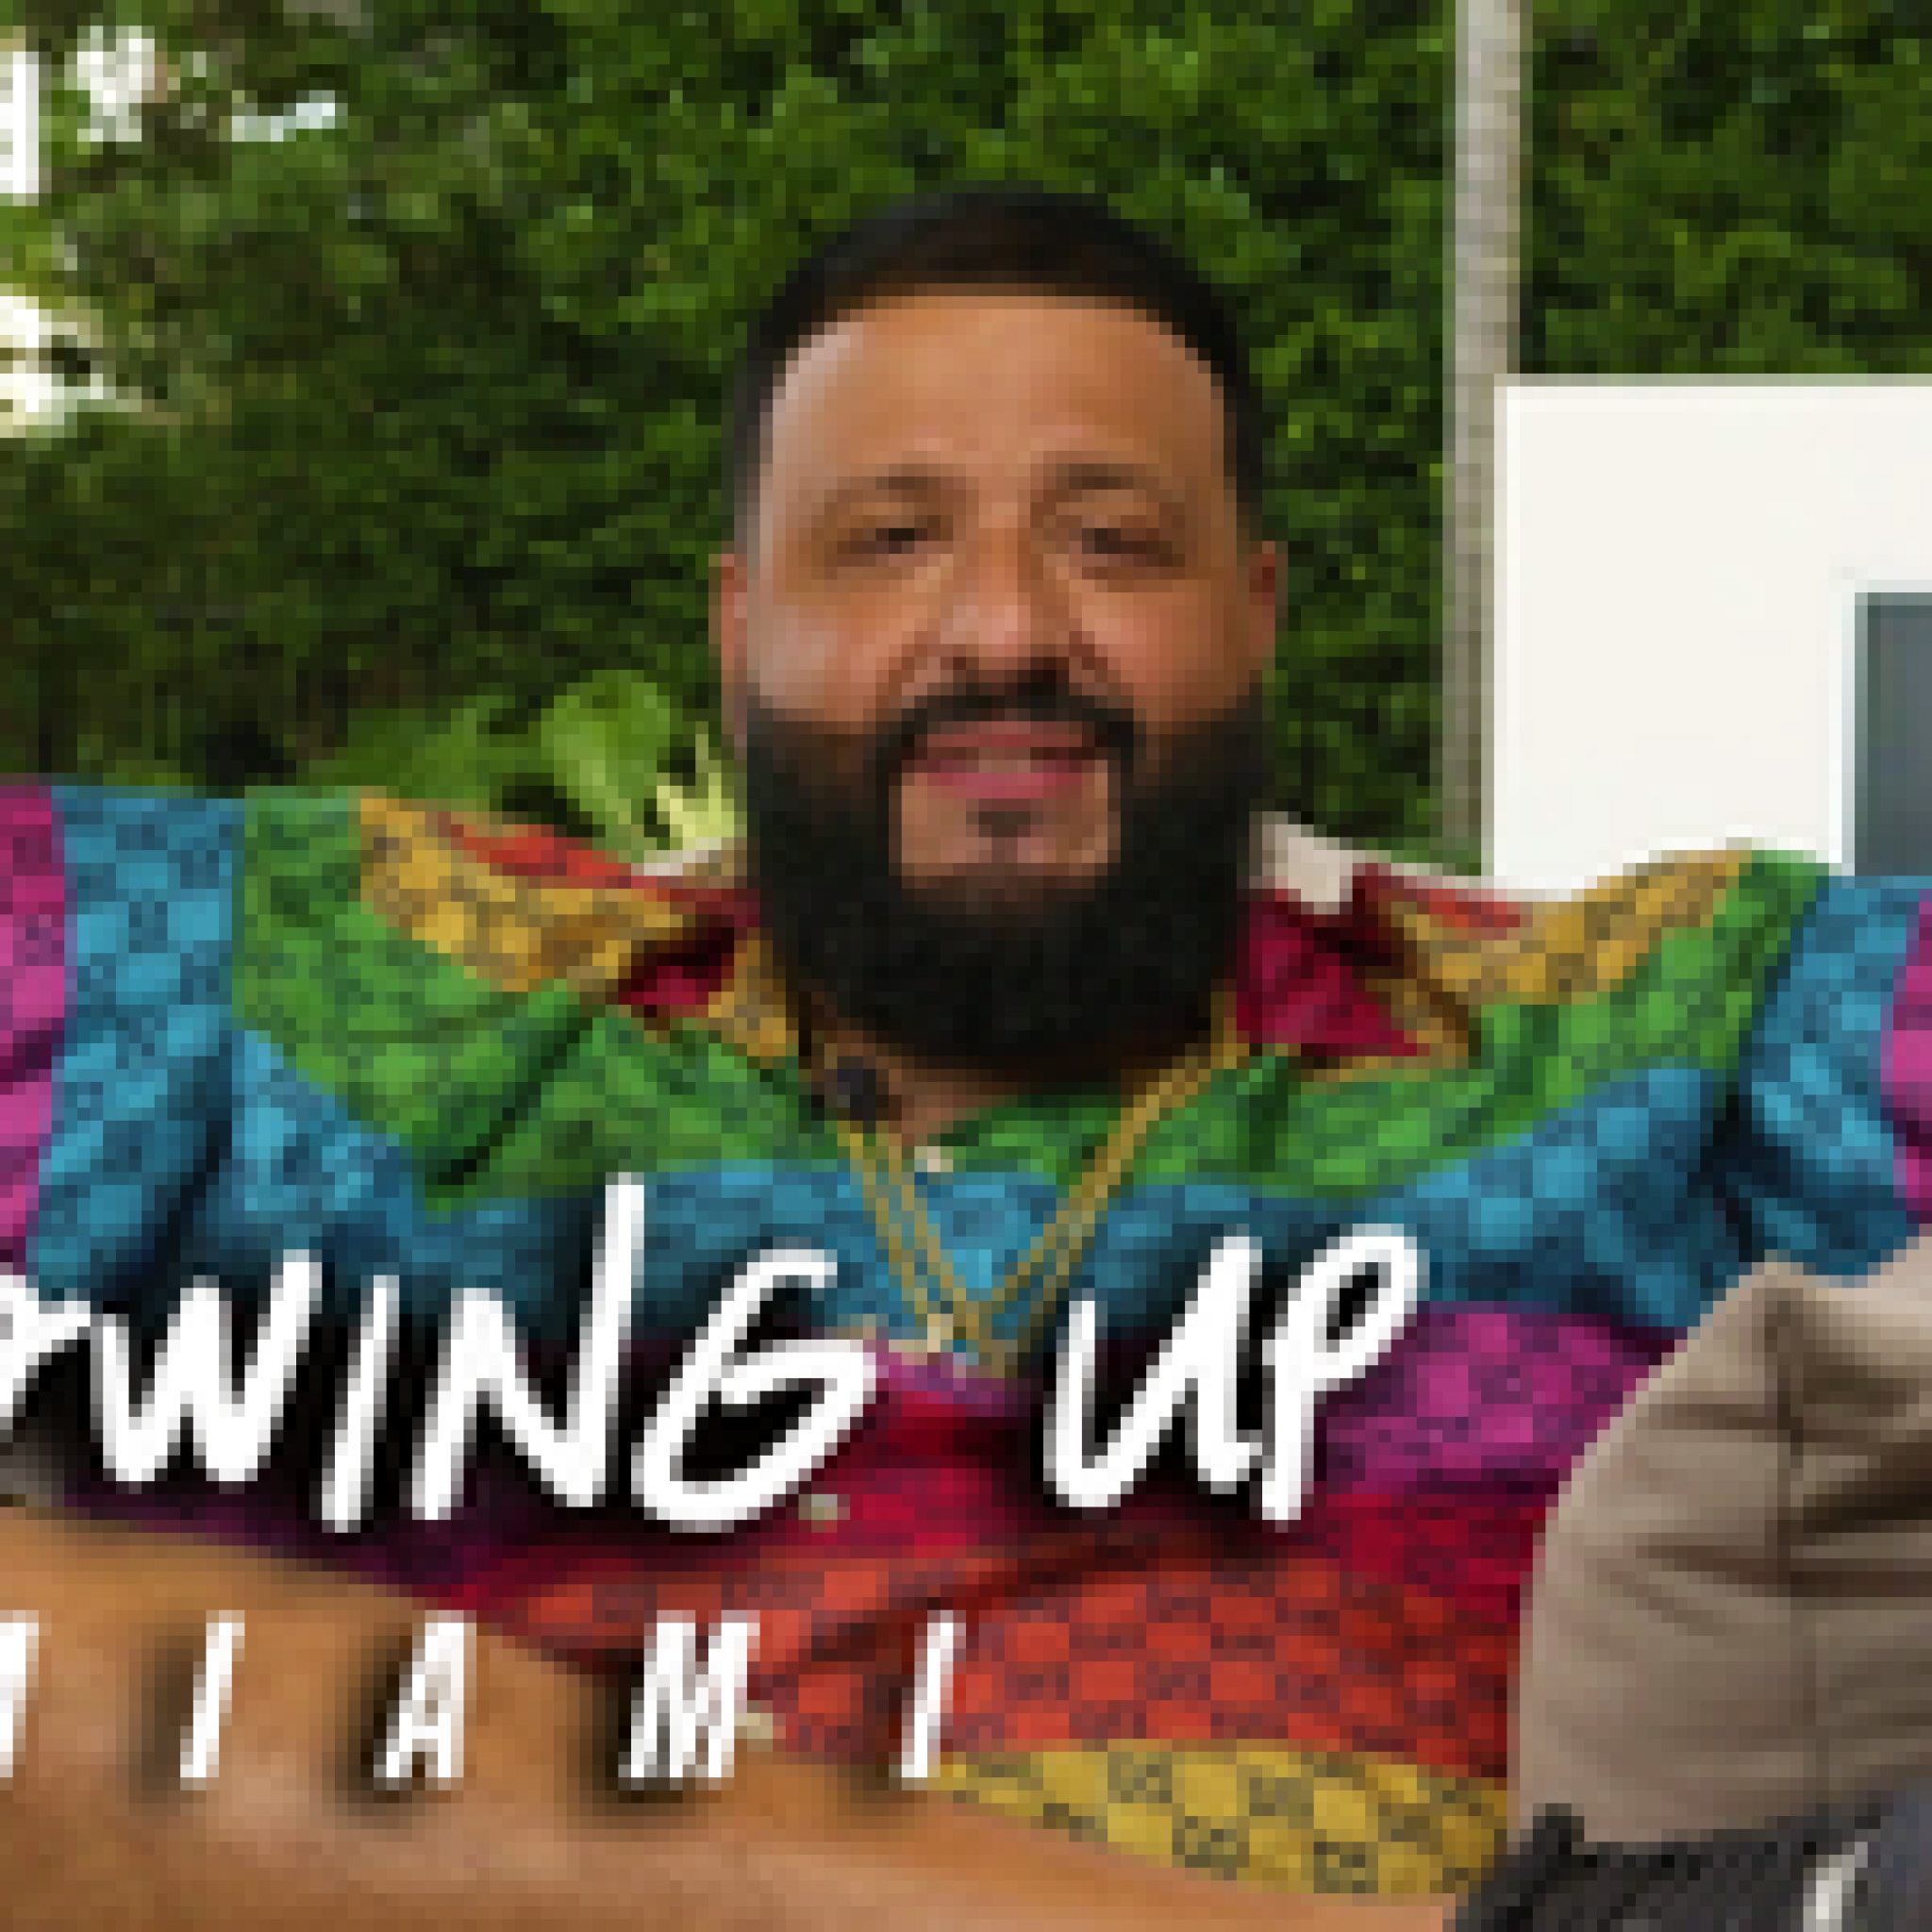 DJ Khaled on ‘Growing Up’ in Miami, His Early Struggles and the Song That Changed His Life